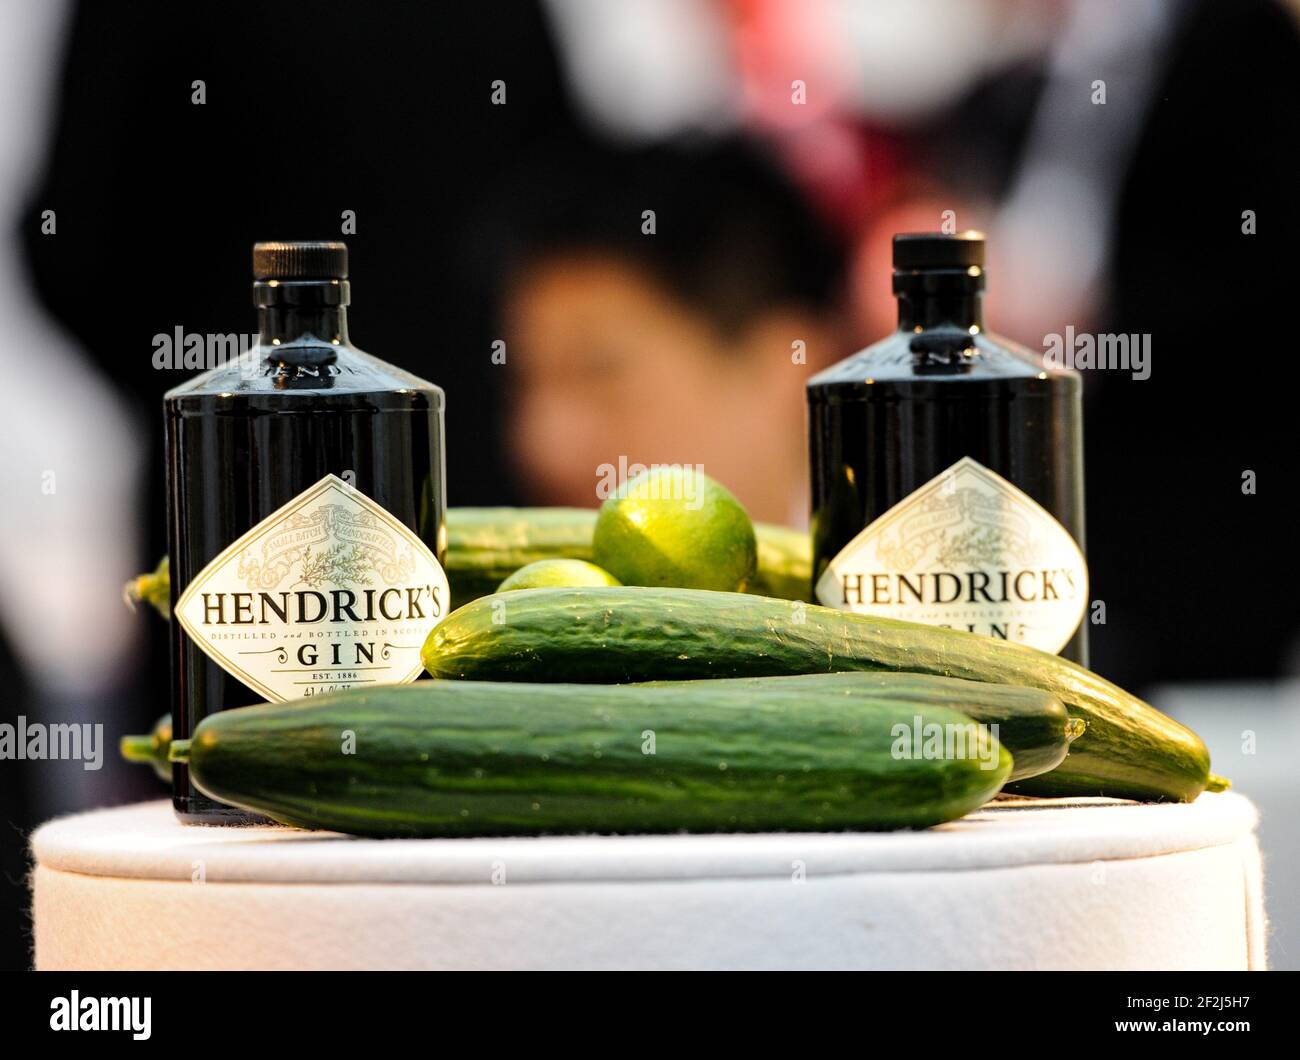 Two bottles of Hendrick's Gin and cucumbers Stock Photo